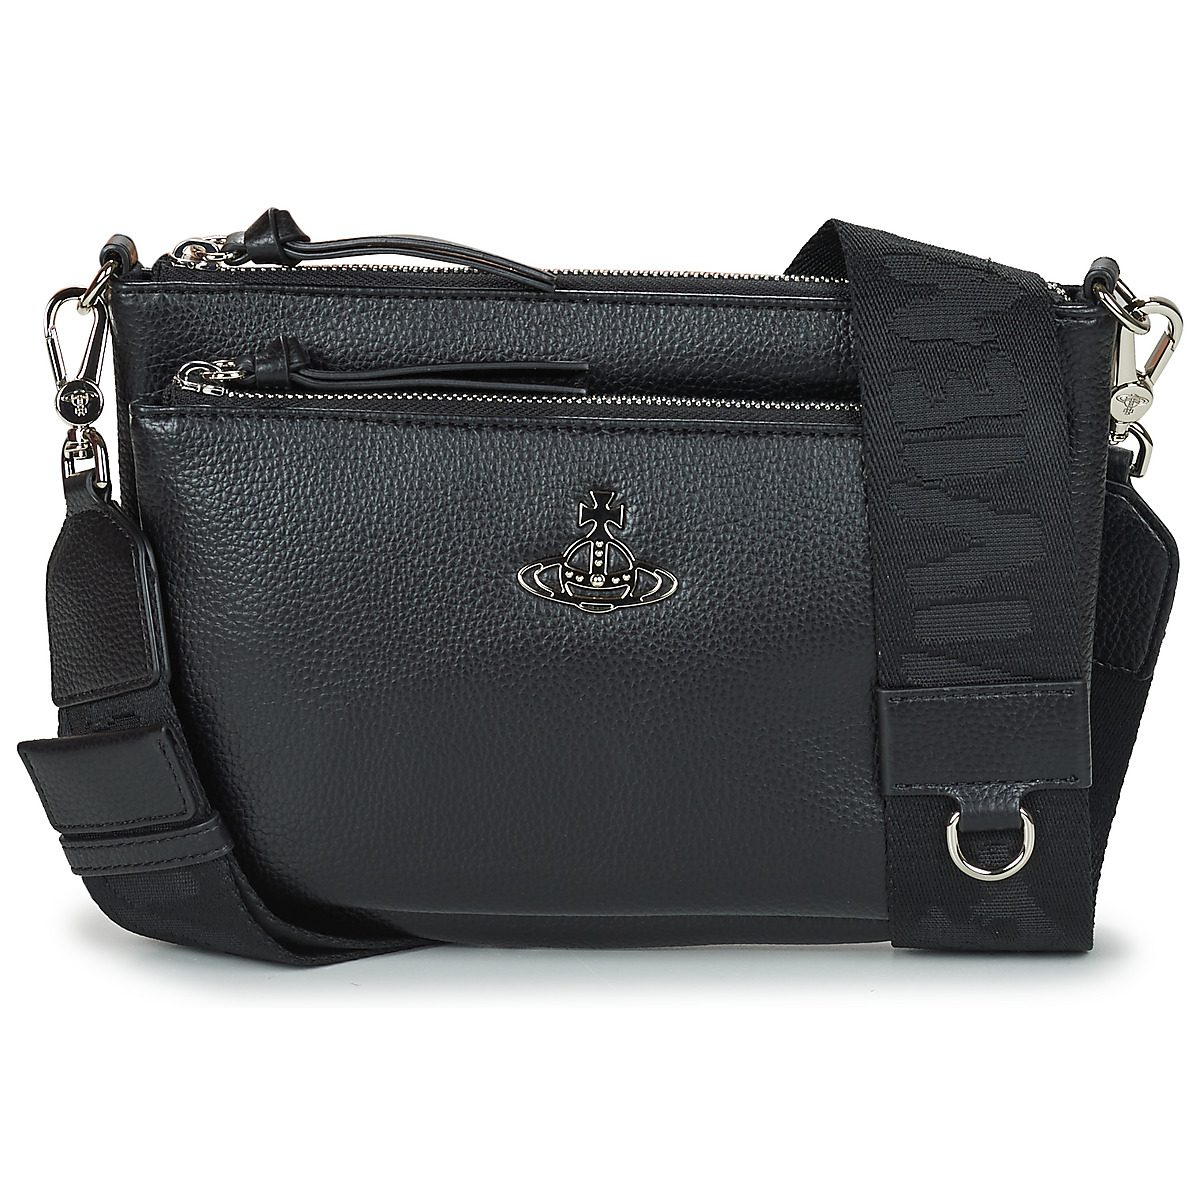 Borse Tracolle Vivienne Westwood PENNY DB POUCH CROSSBODY Nero